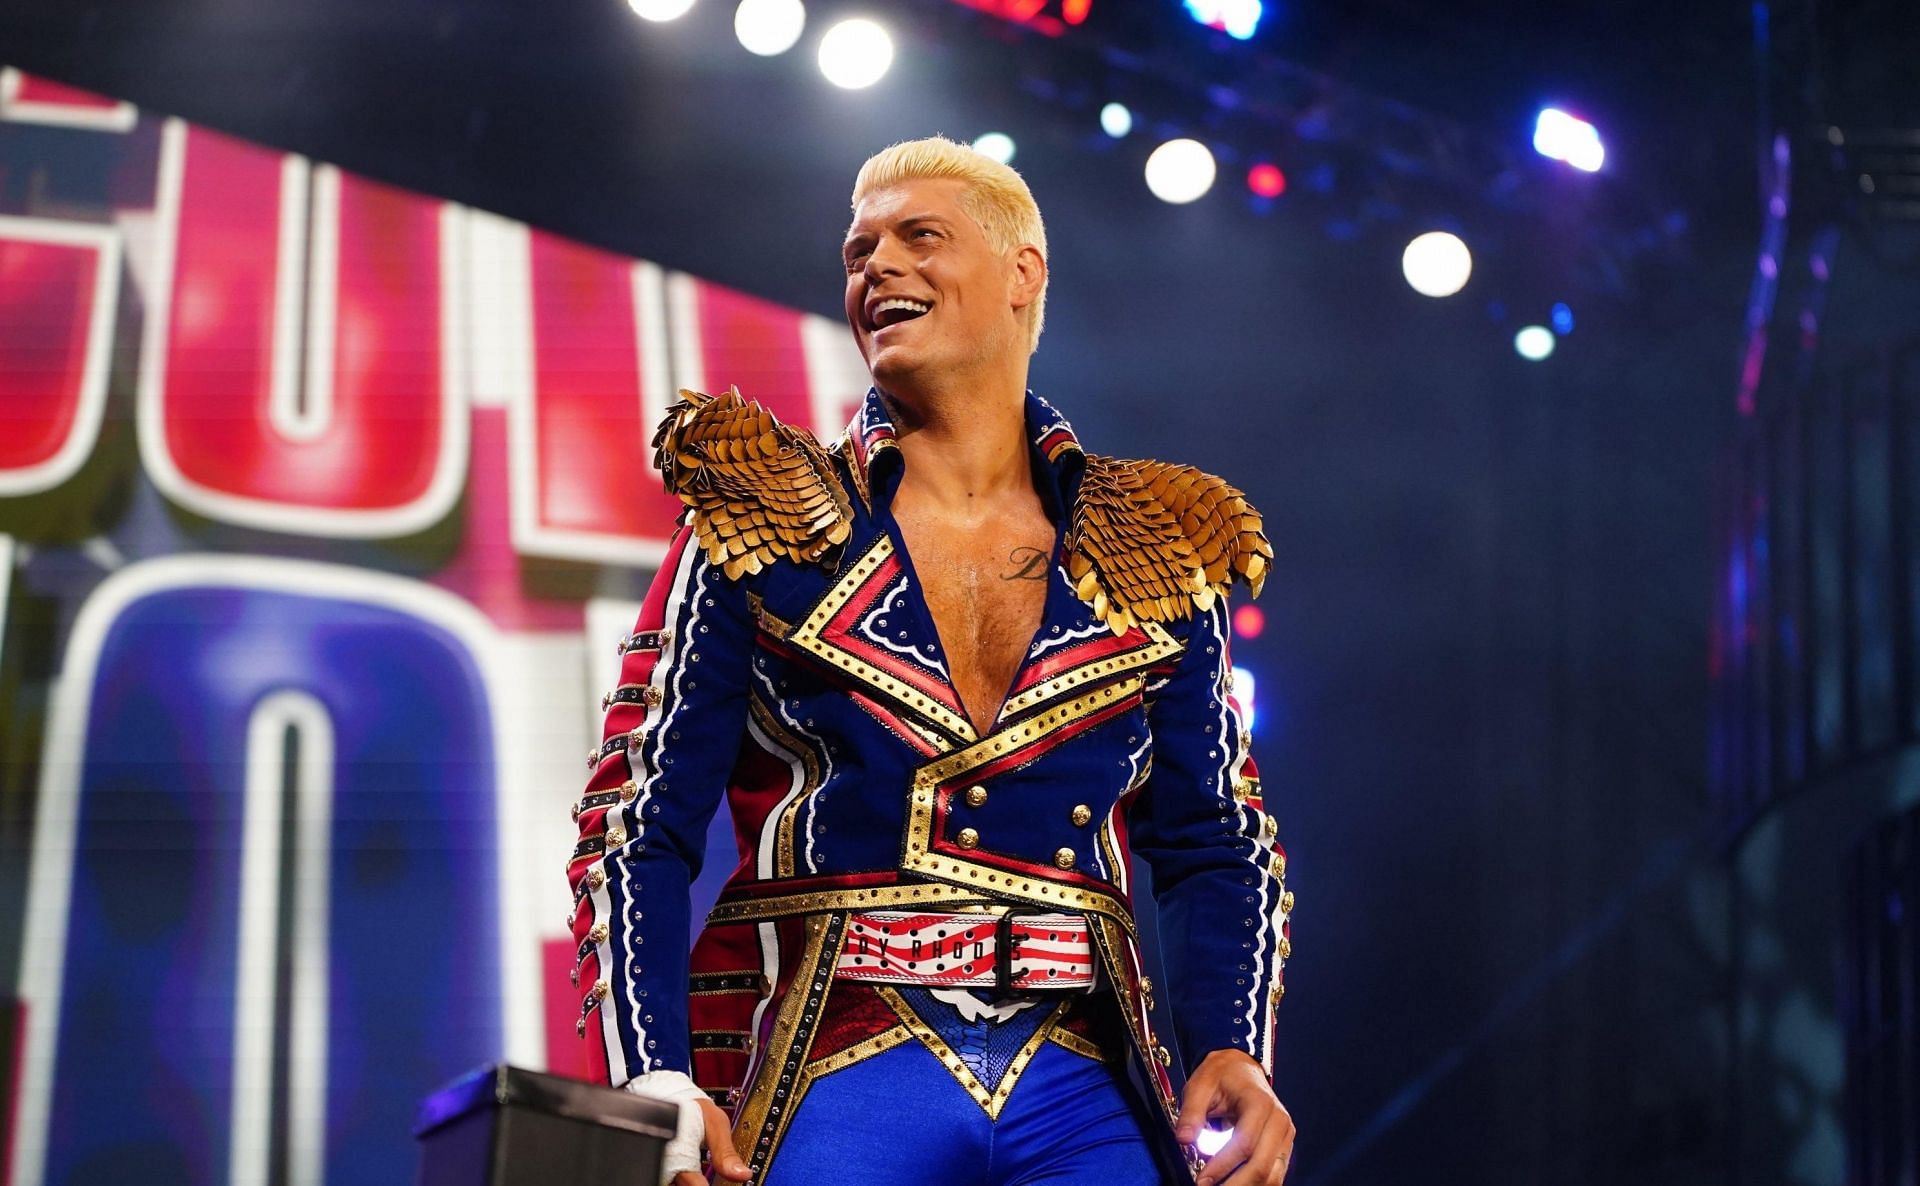 Cody Rhodes moved back to WWE from AEW in 2022.